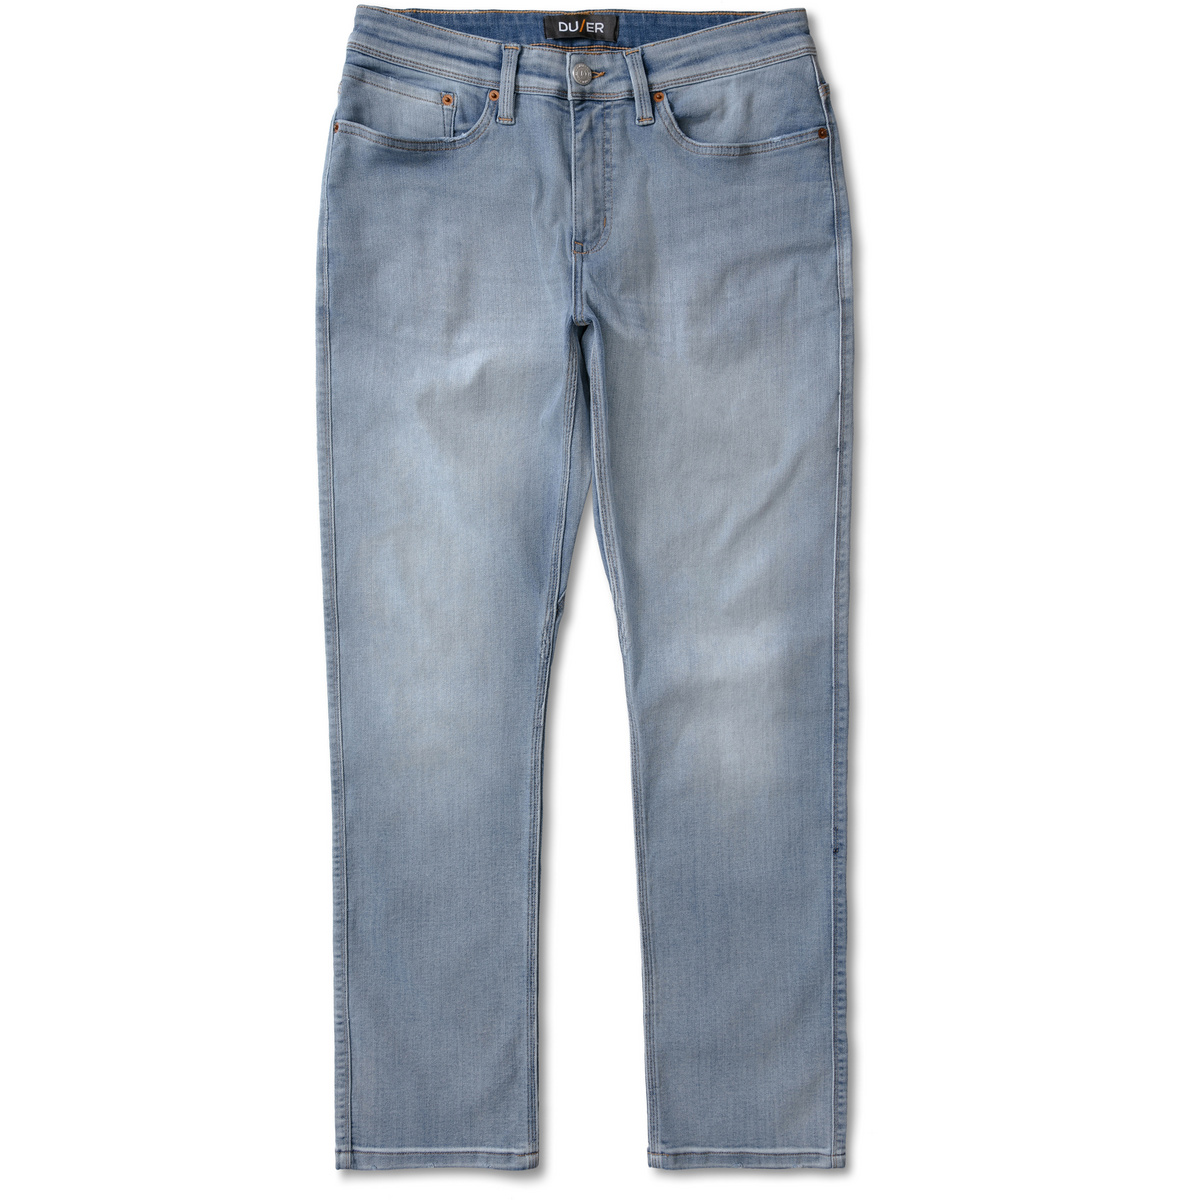 Image of Duer Uomo Jeans Performance Denim Relaxed Taper